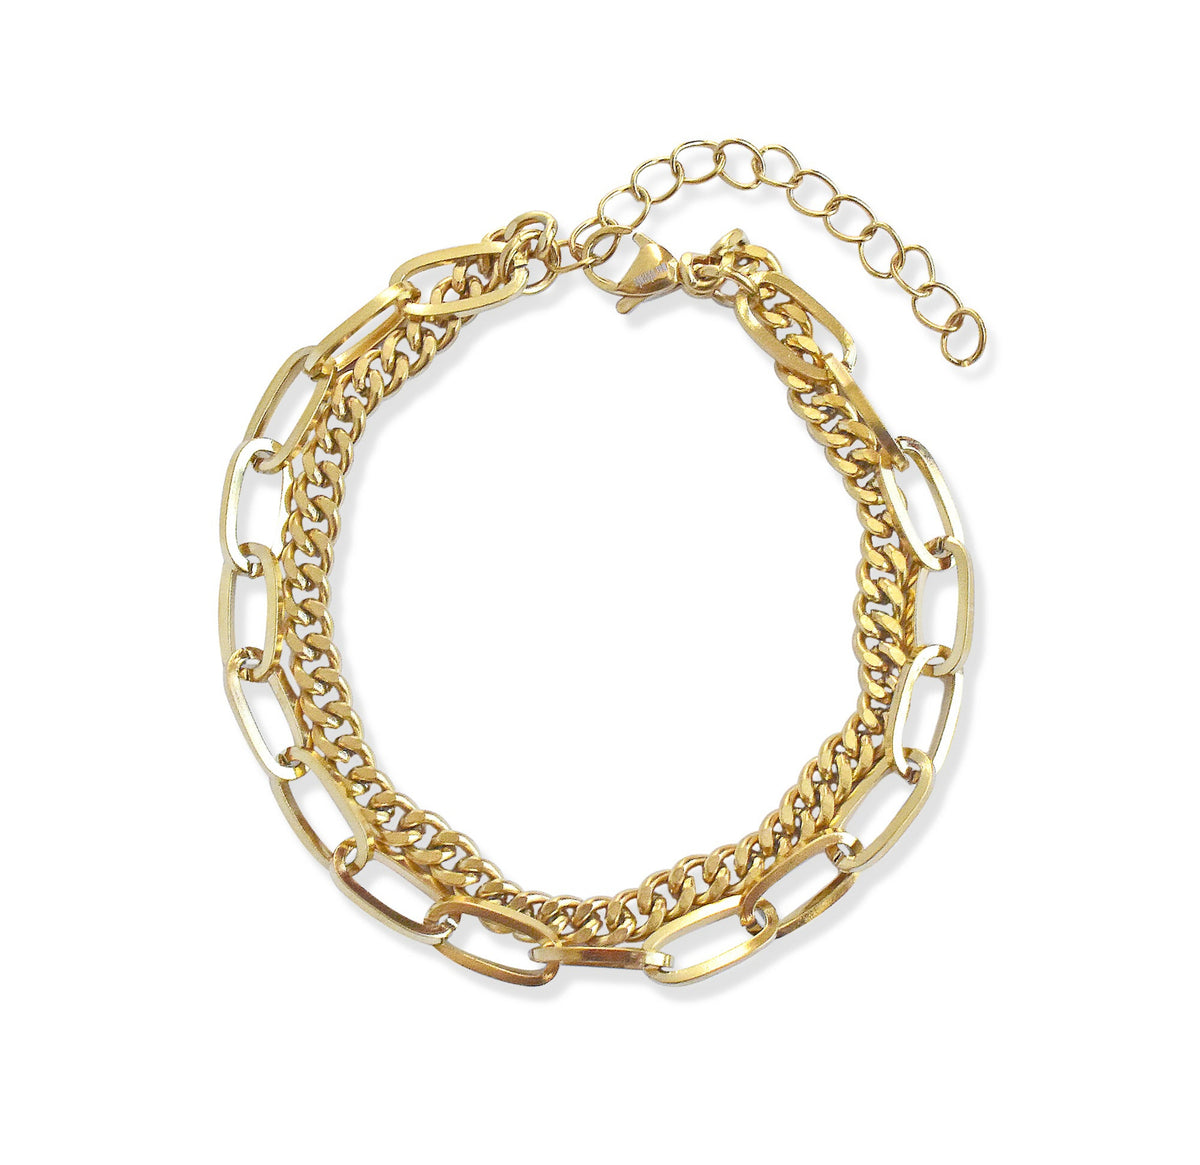 duo chain chunky gold bracelet